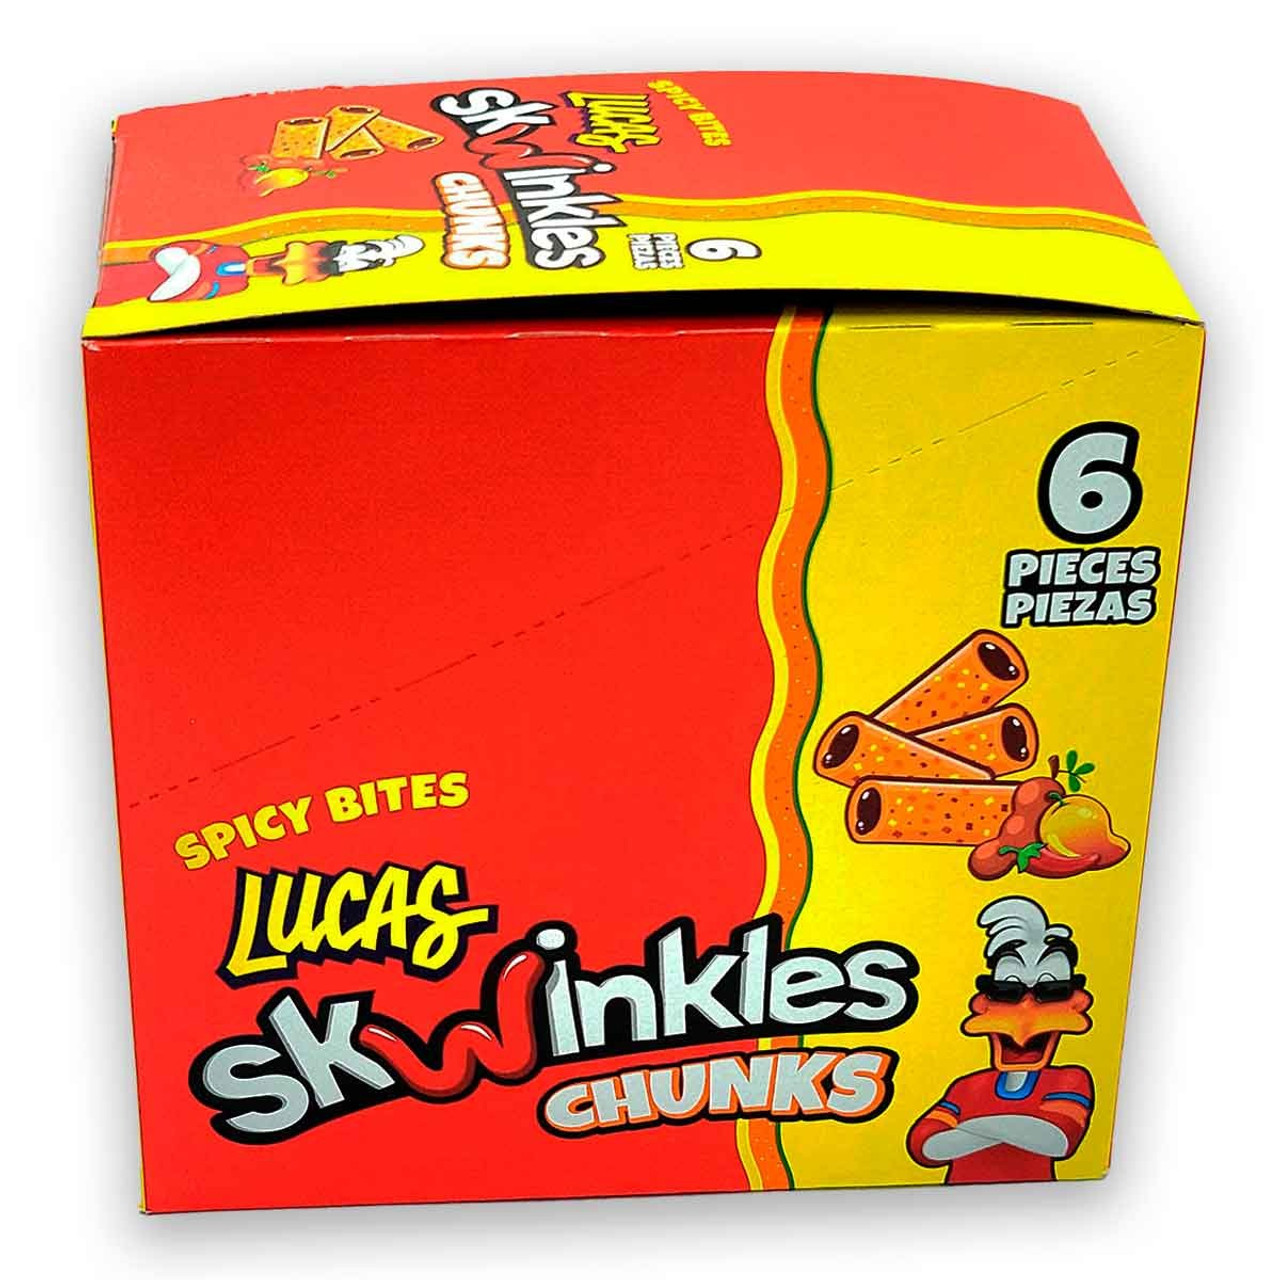 Lucas Skwinkles Mango Spicy Chunks 6-Pieces Pack